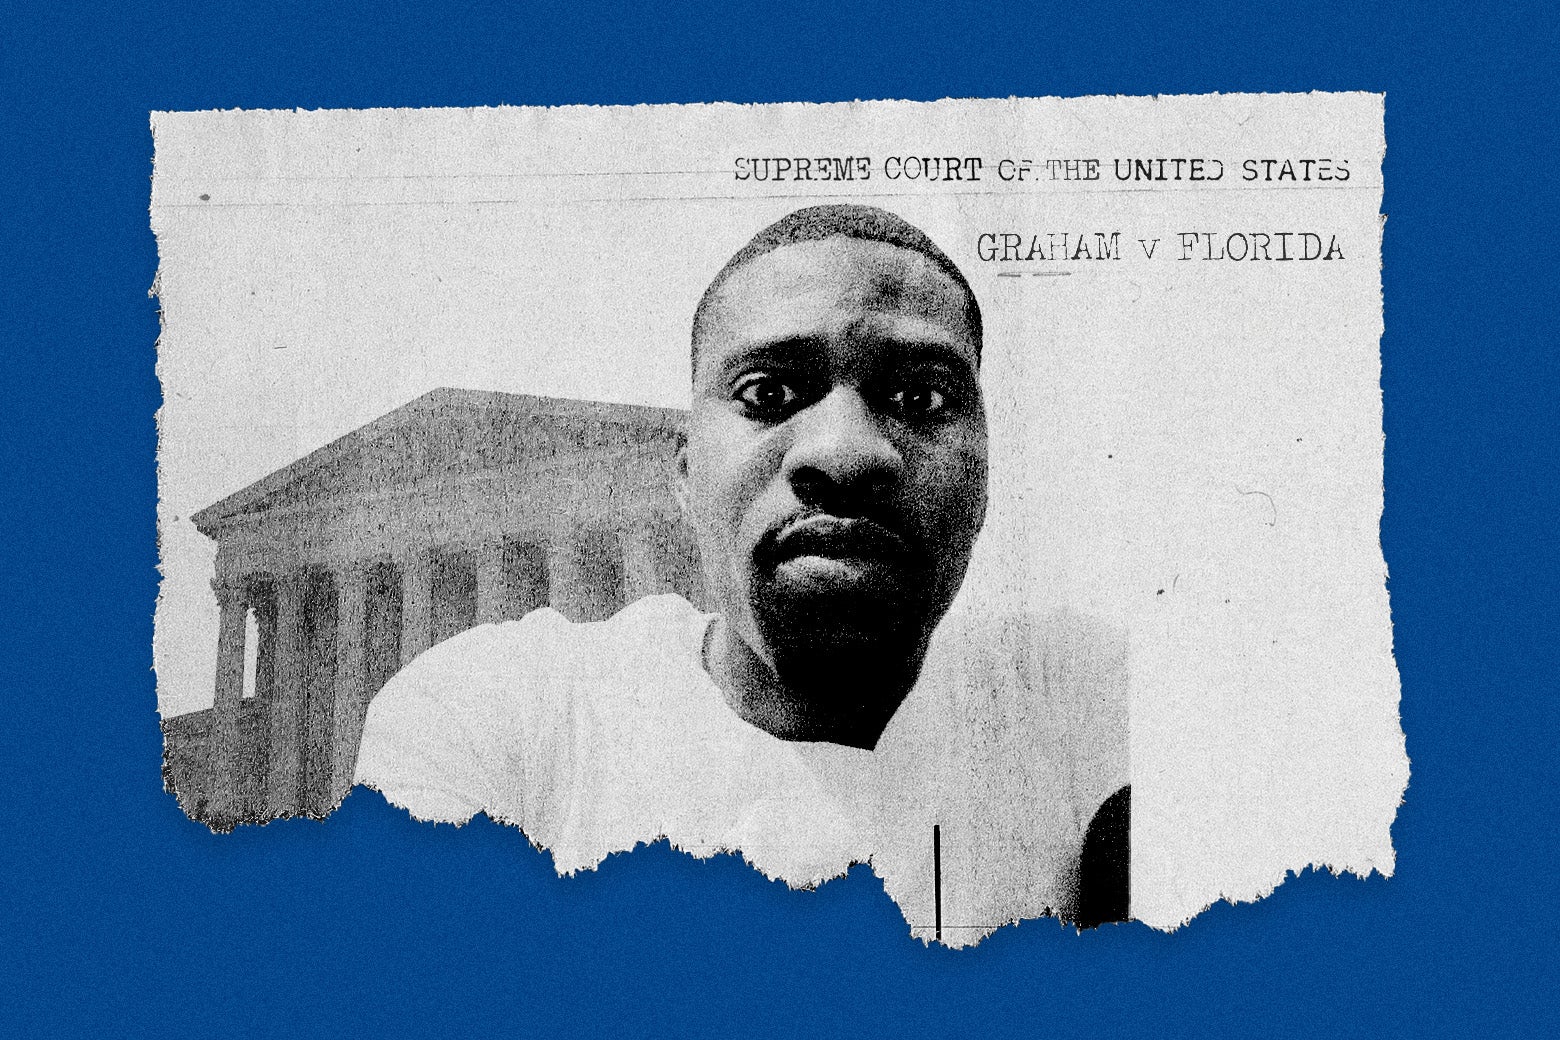 Terrence Graham in a T-shirt with the Supreme Court building behind him and the text "GRAHAM V. FLORIDA."